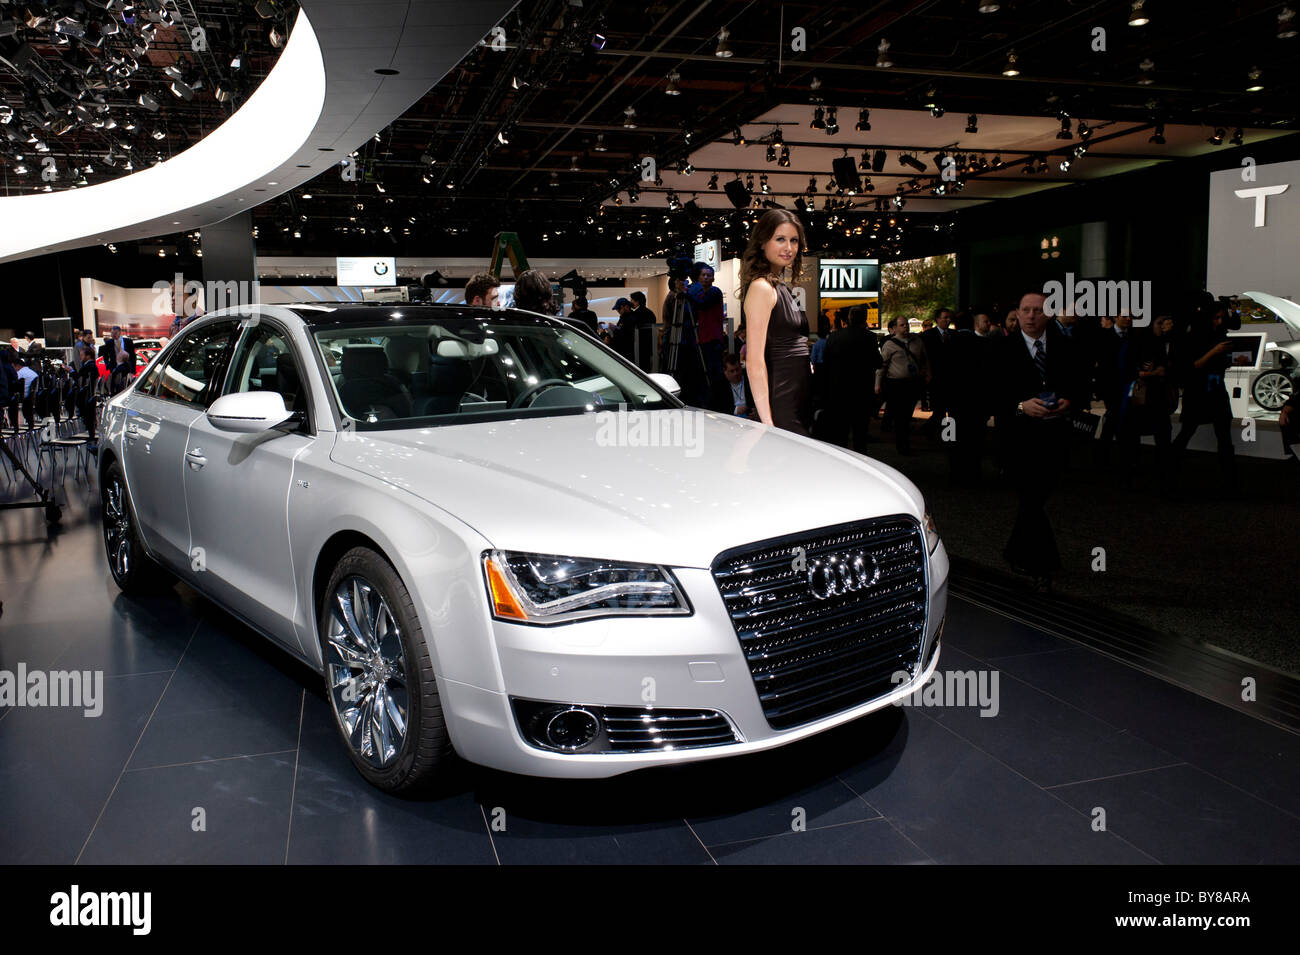 Audi A8 at the 2011 North American International Auto Show in Detroit Michigan USA Stock Photo